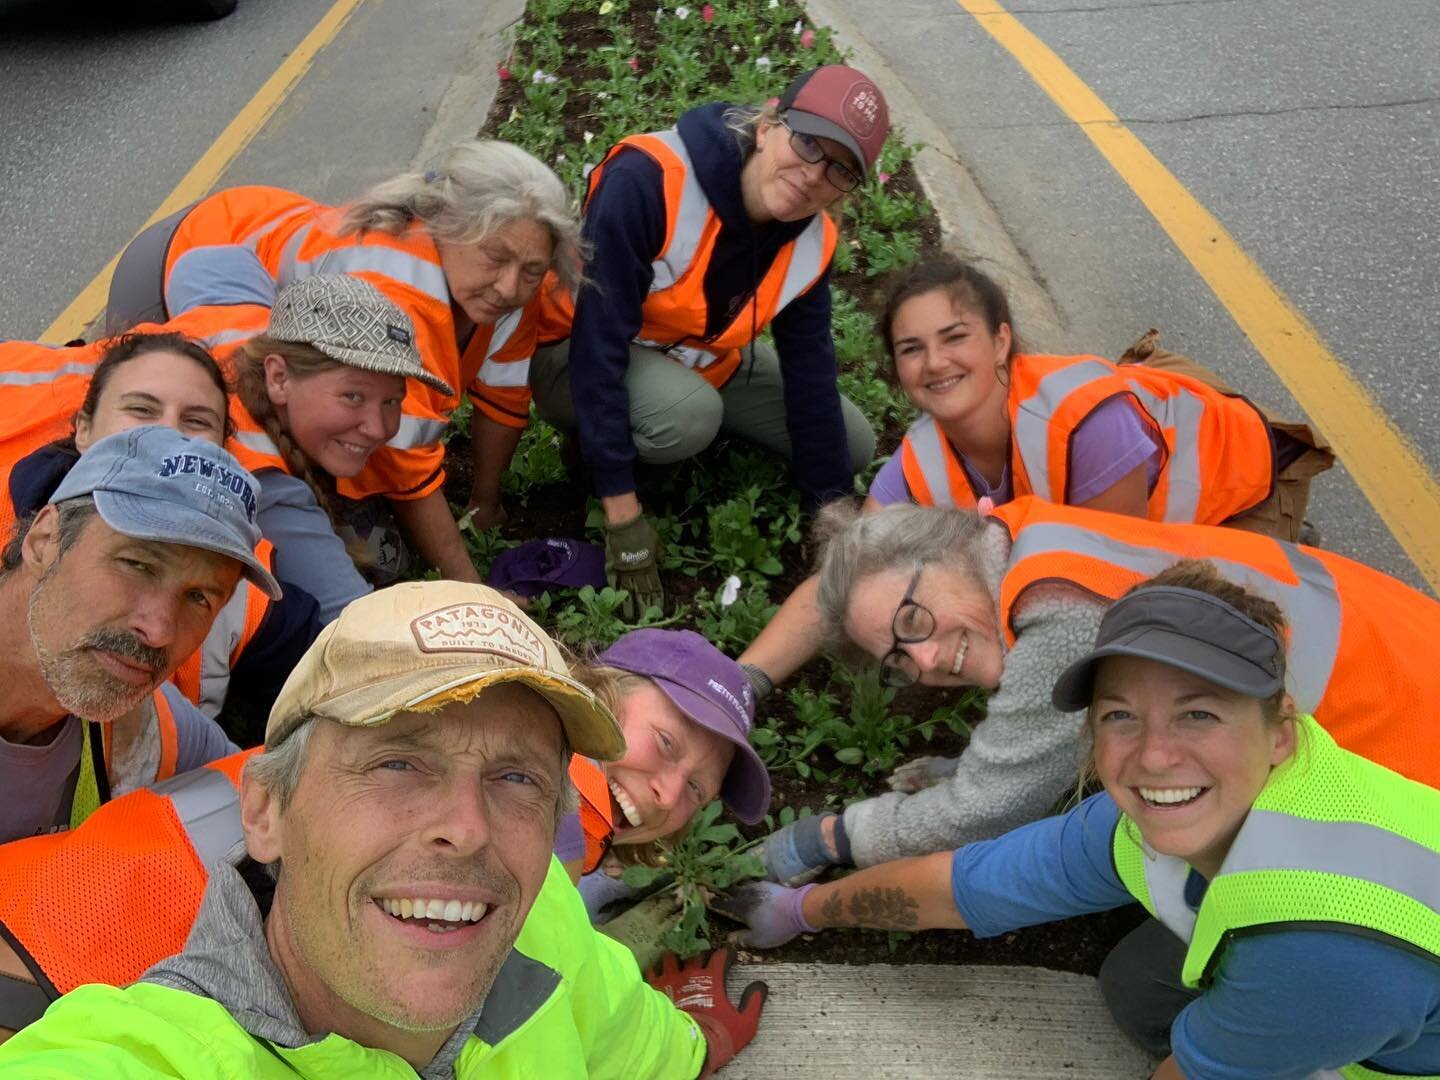 Pretty Flowers is hiring!!! Looking for multiple skilled landscapers to join our amazing and fun crew. Most job sites are in Brunswick and Harpswell. All applicants must have a reliable vehicle, be able to work outside in most weather conditions from